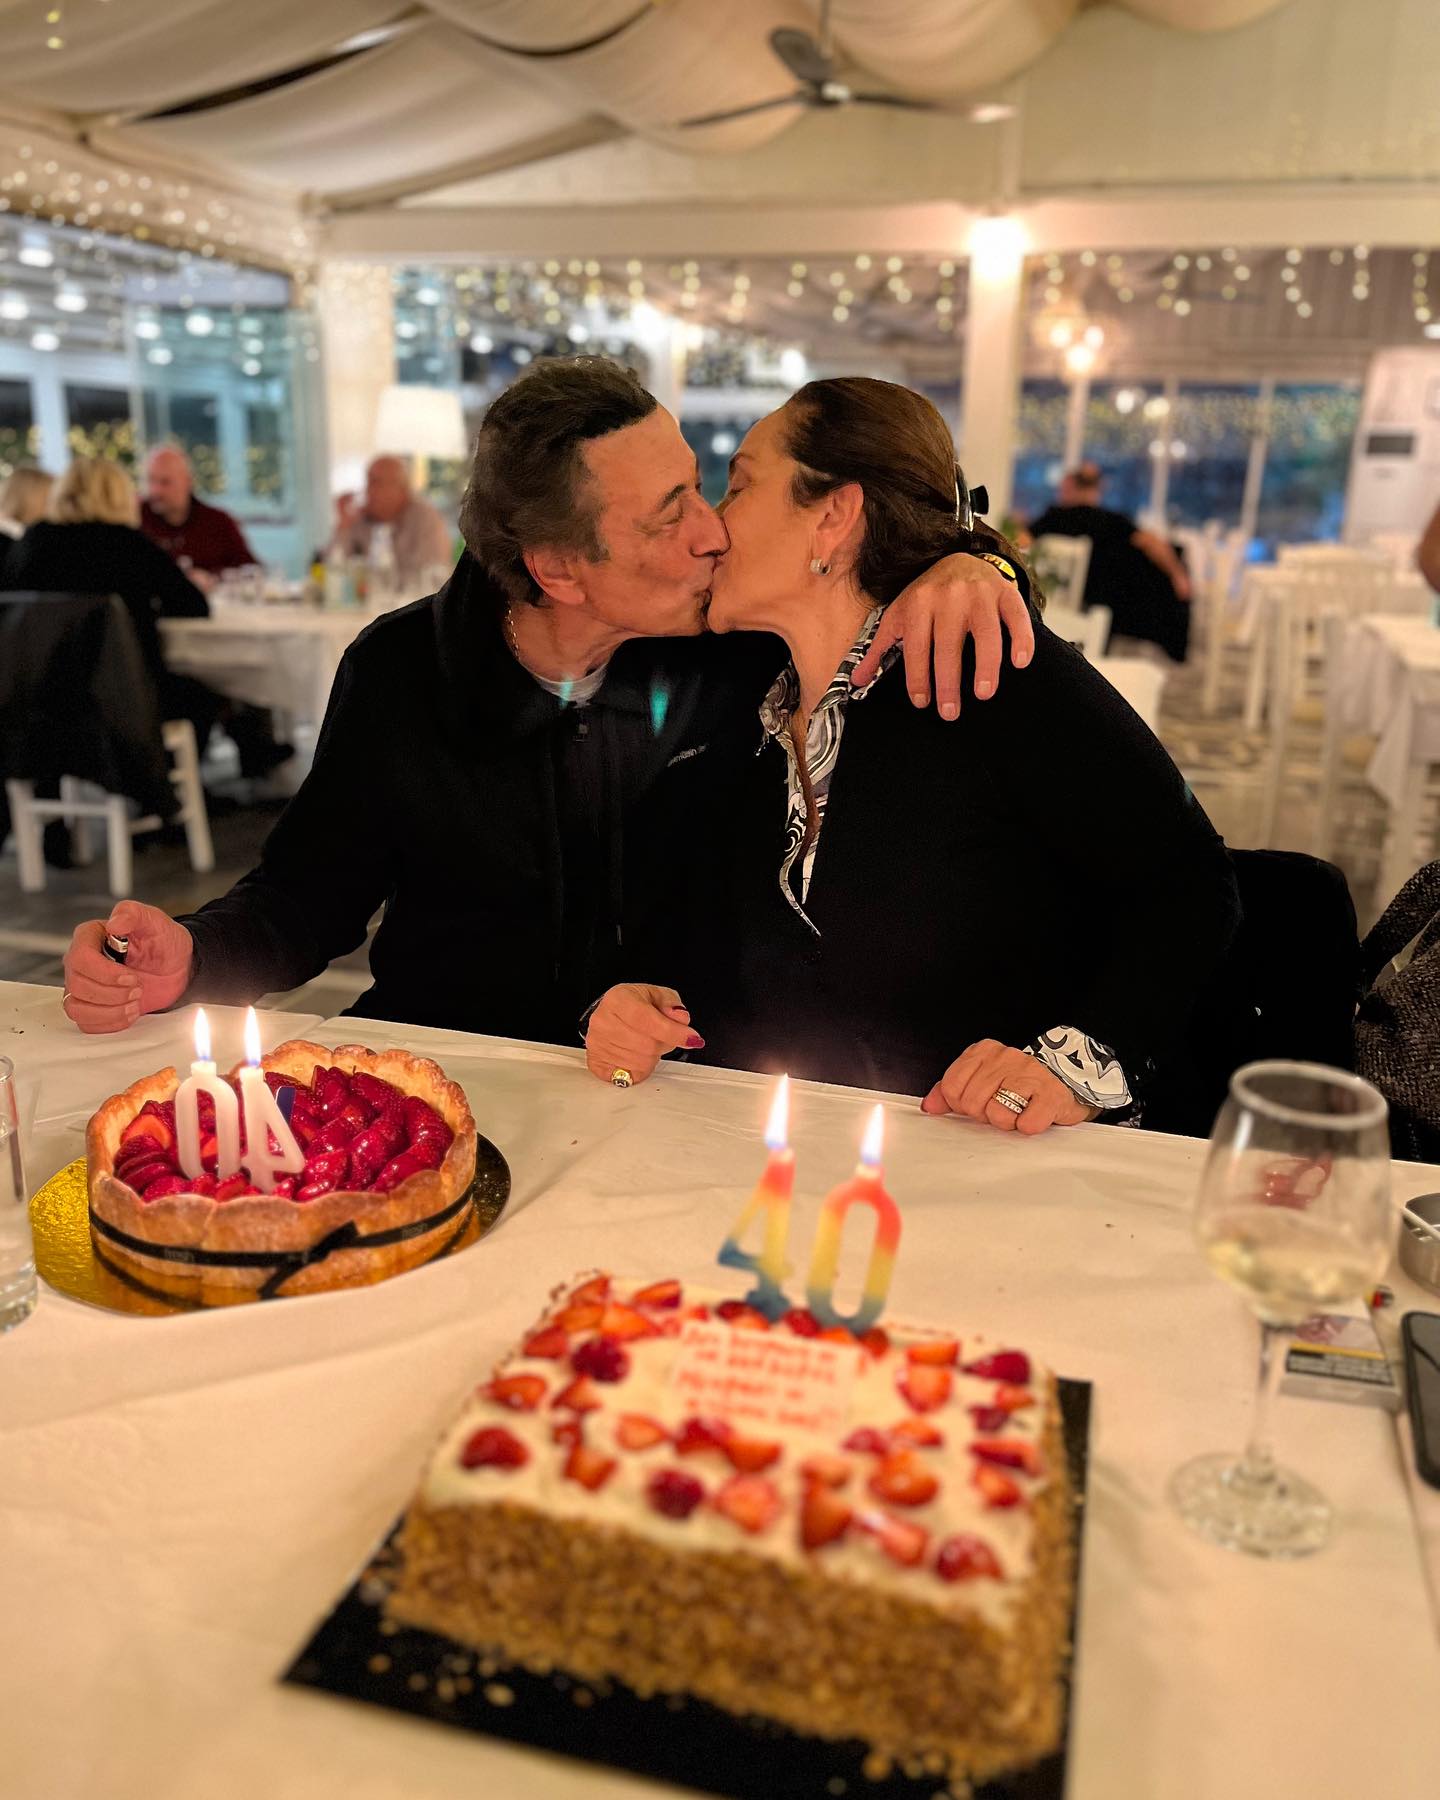 Photo by Antypas on December 11 2023. May be an image of 2 people people kissing cake and candle